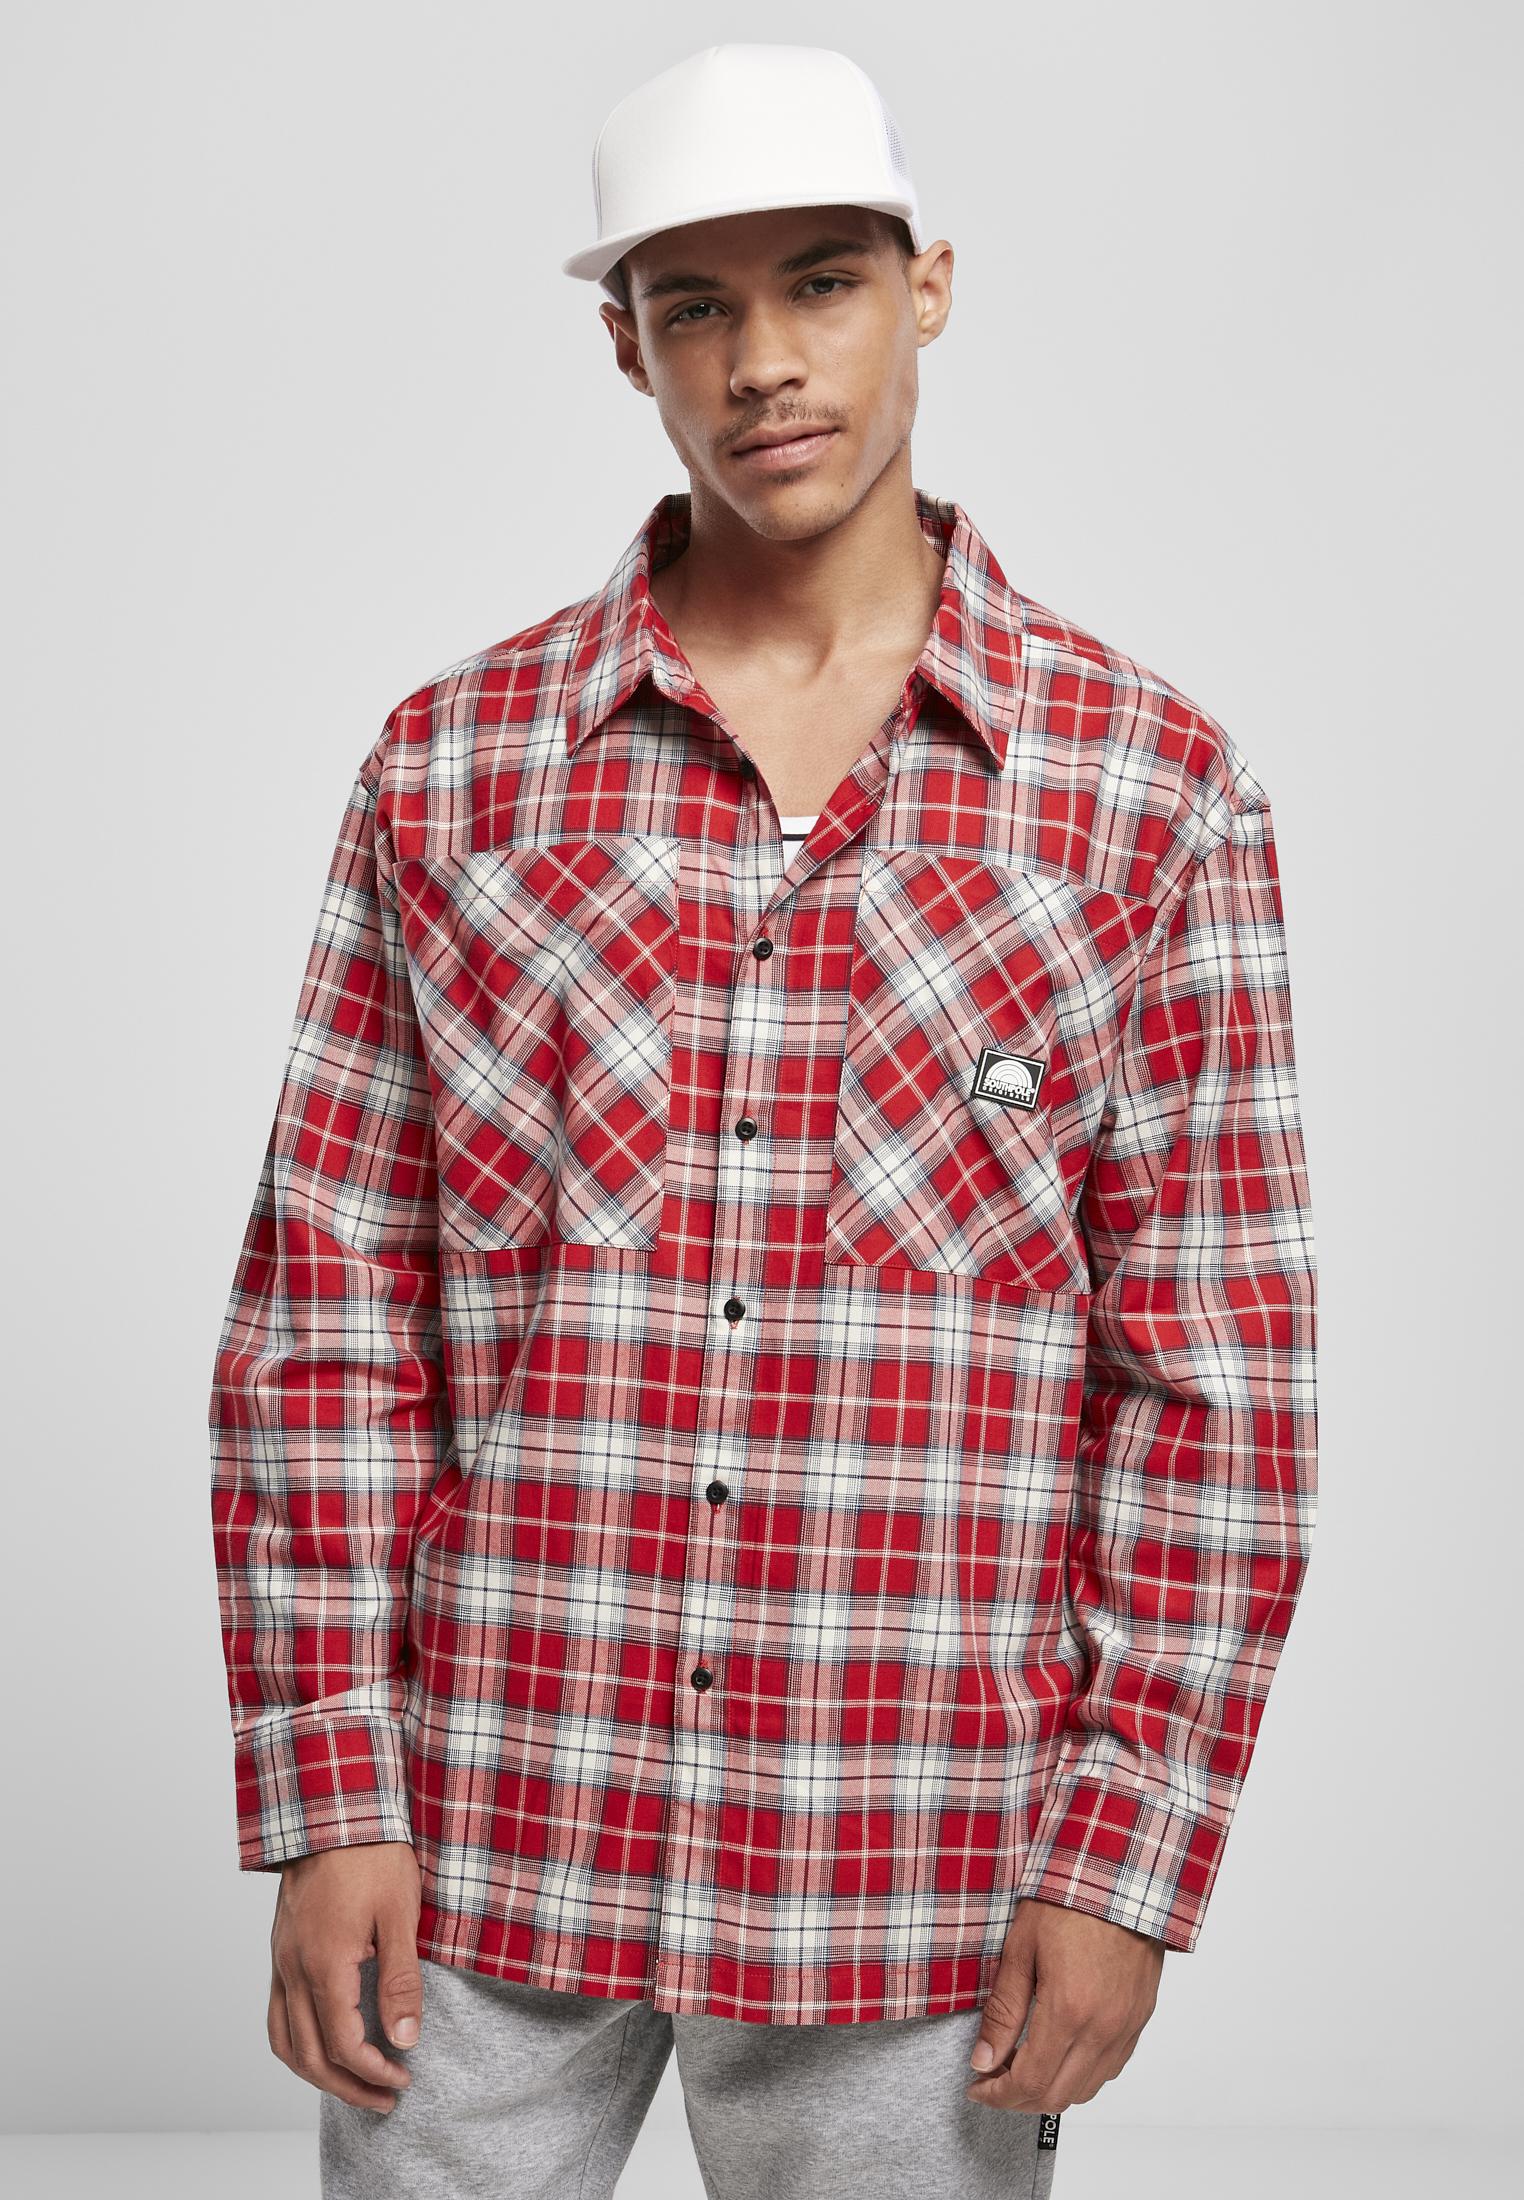 Southpole Southpole Checked Woven Shirt (Farbe: SP red / Größe: M)